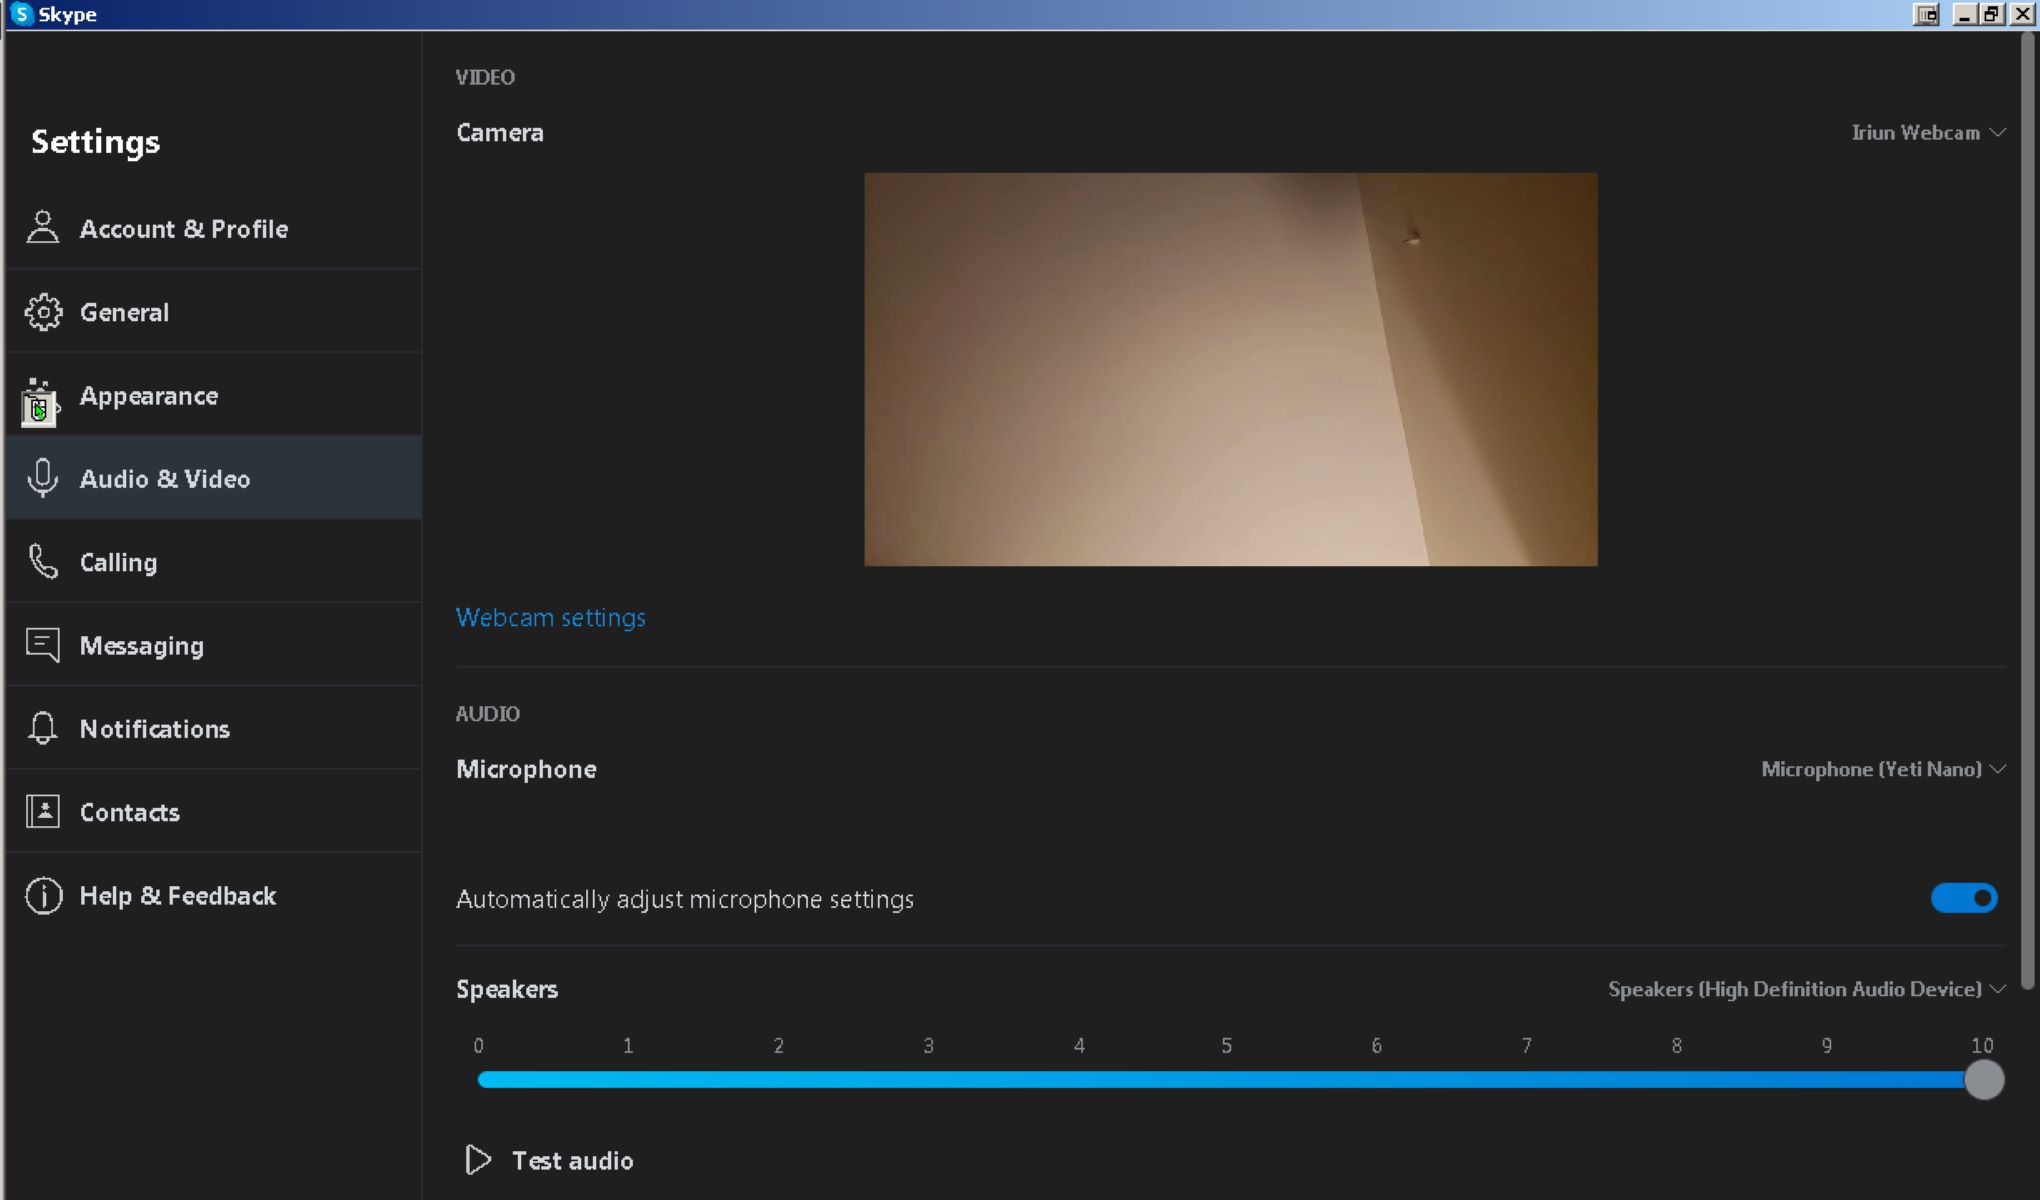 How To Change Webcam On Skype